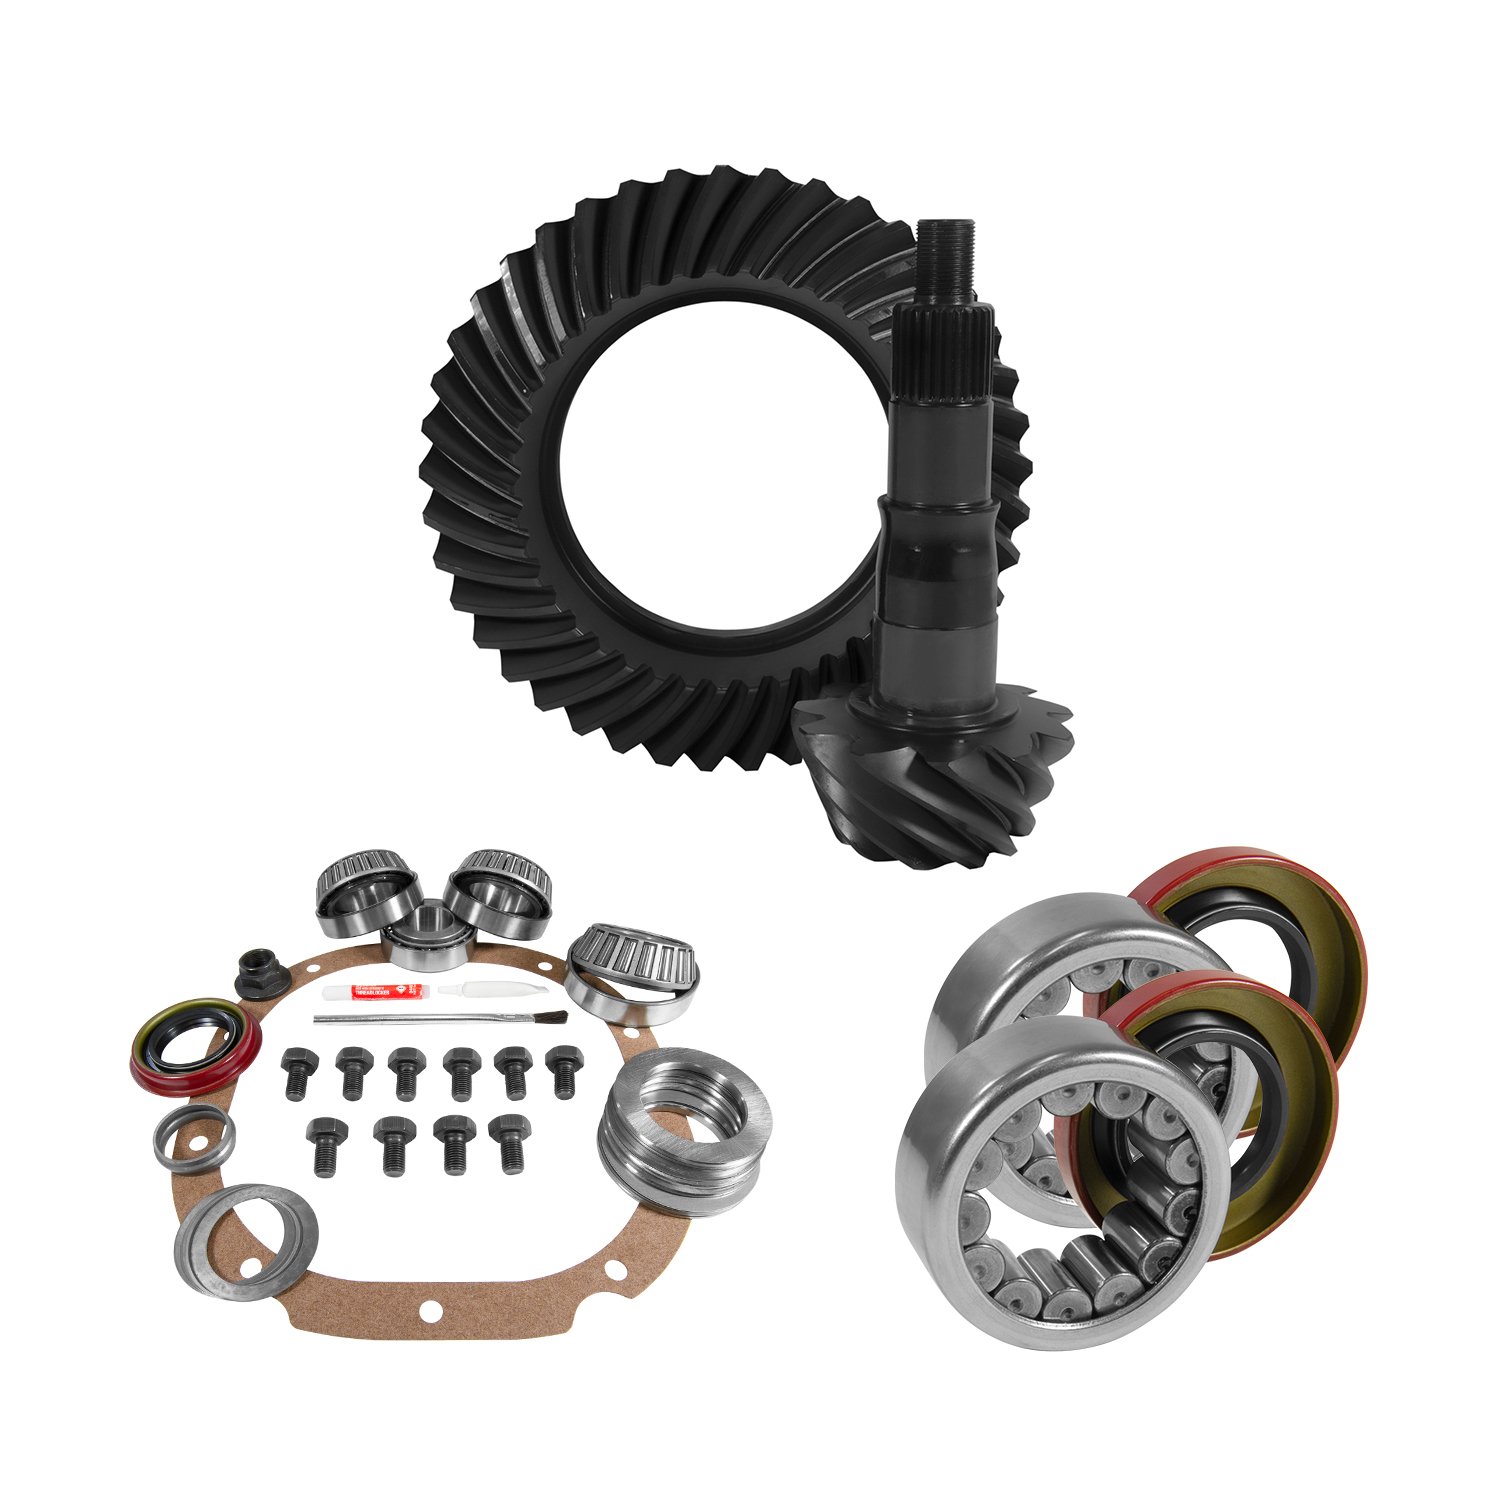 USA Standard 10767 8.8 in. Ford 3.73 Rear Ring & Pinion Install Kit, 2.99 in. Od Axle Bearings & Seals